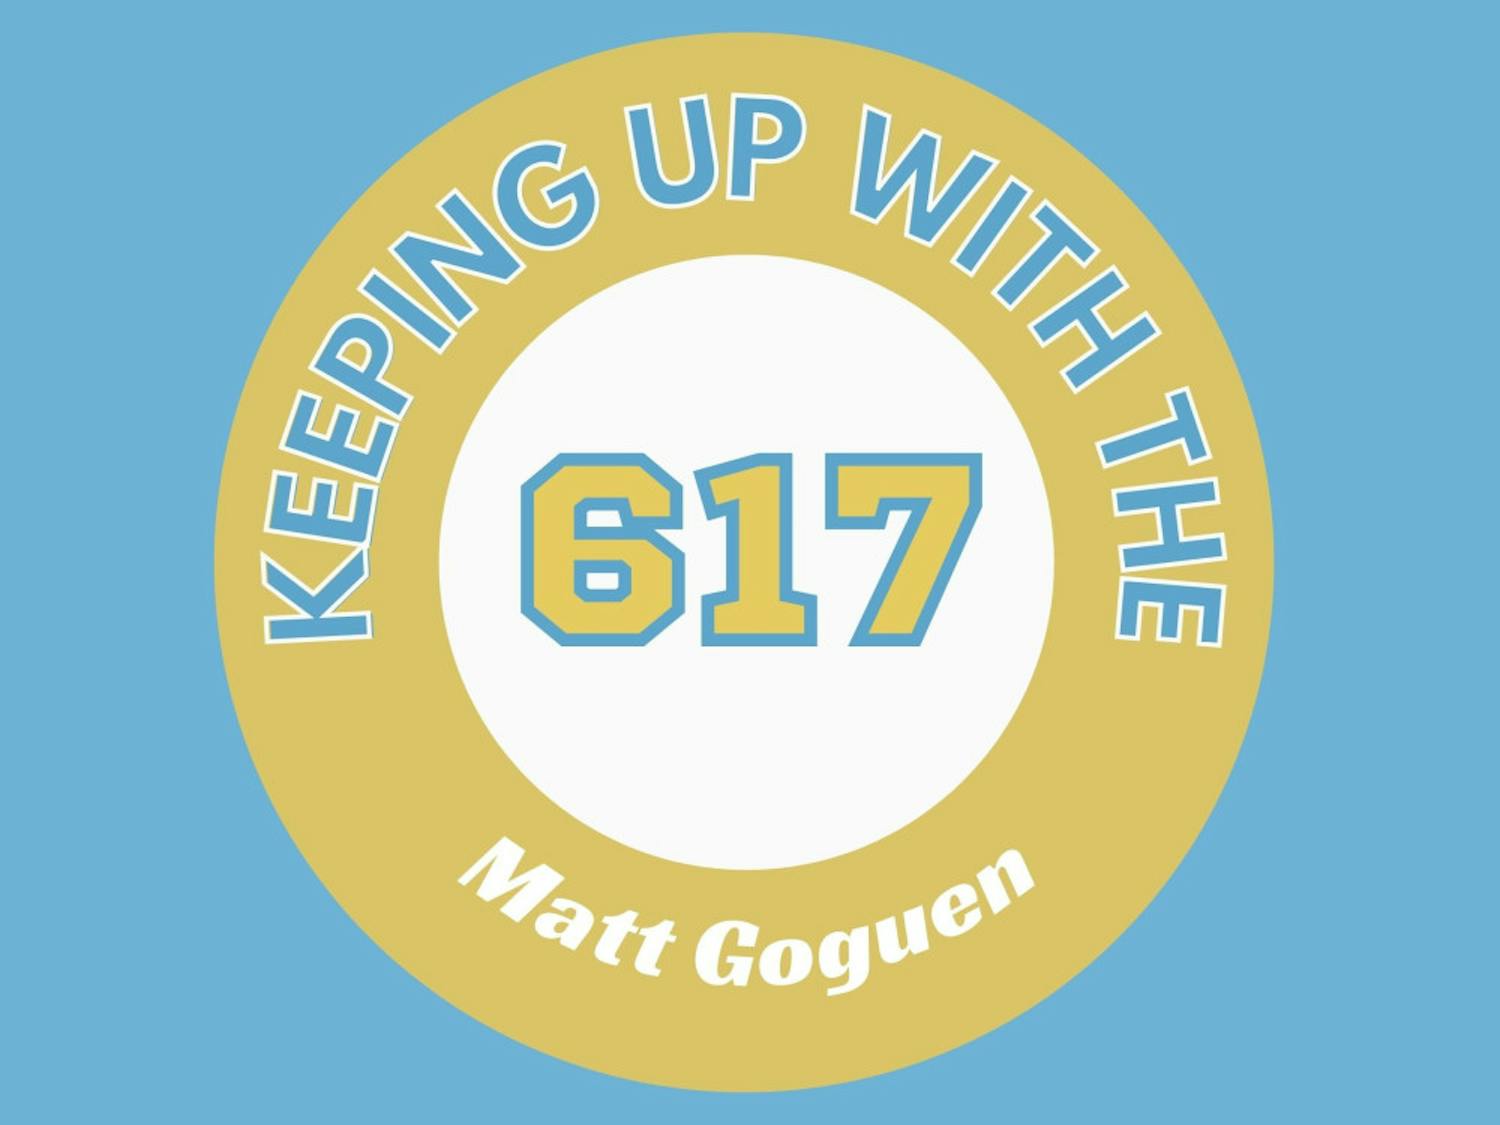 Keeping-up-with-the-617